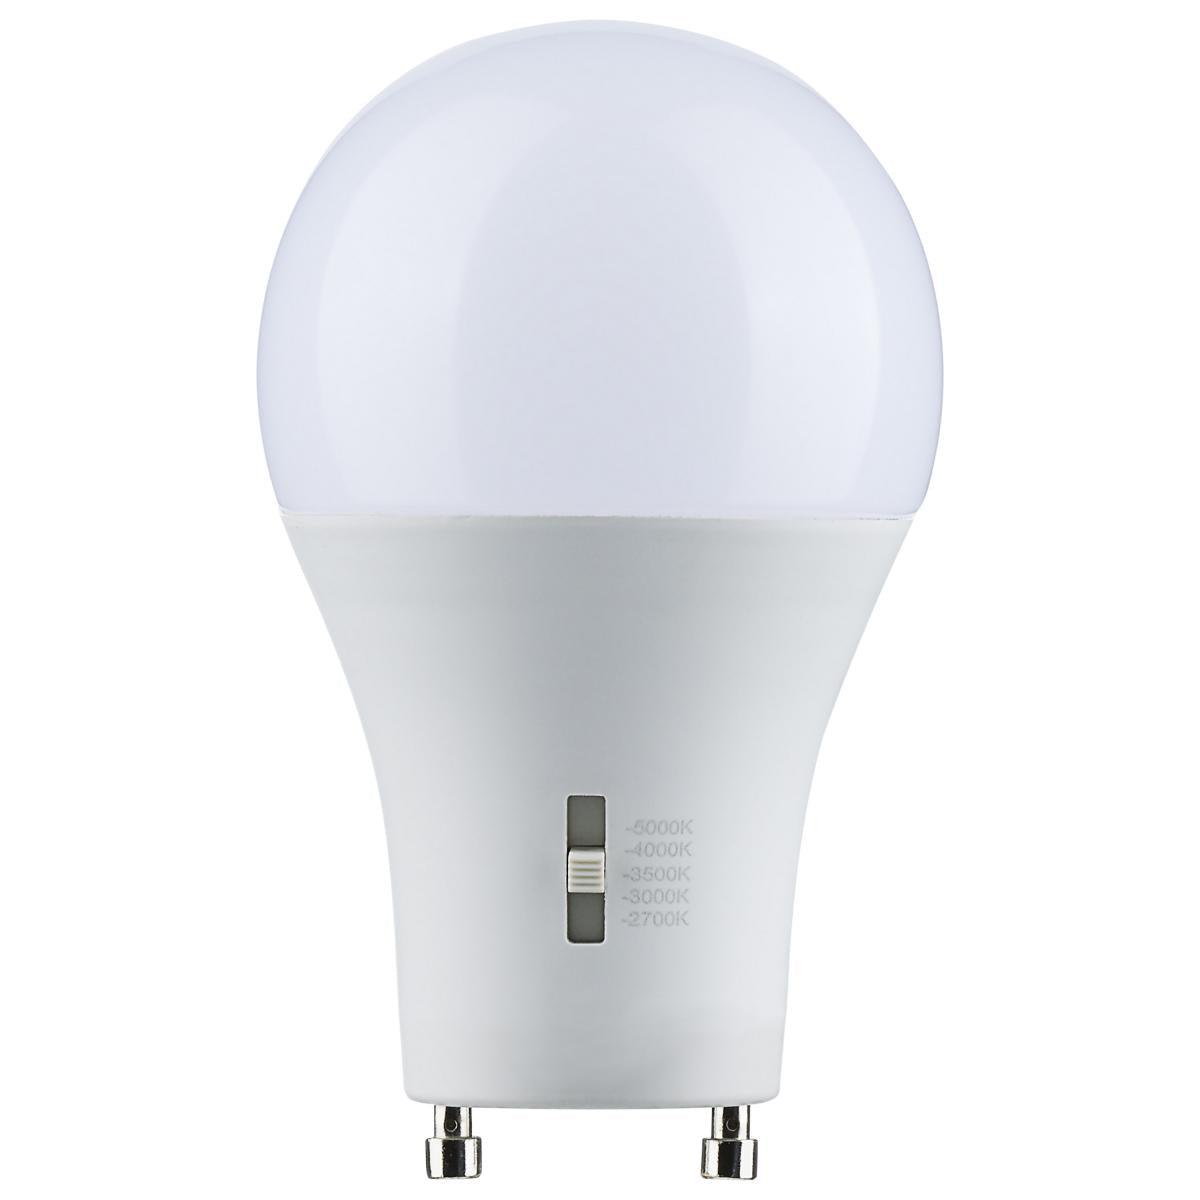 A19 LED Bulb, 100W Equivalent, 14 Watt, 1600 Lumens, Selectable CCT 2700K to 5000K, GU24 Base, Frosted Finish - Bees Lighting